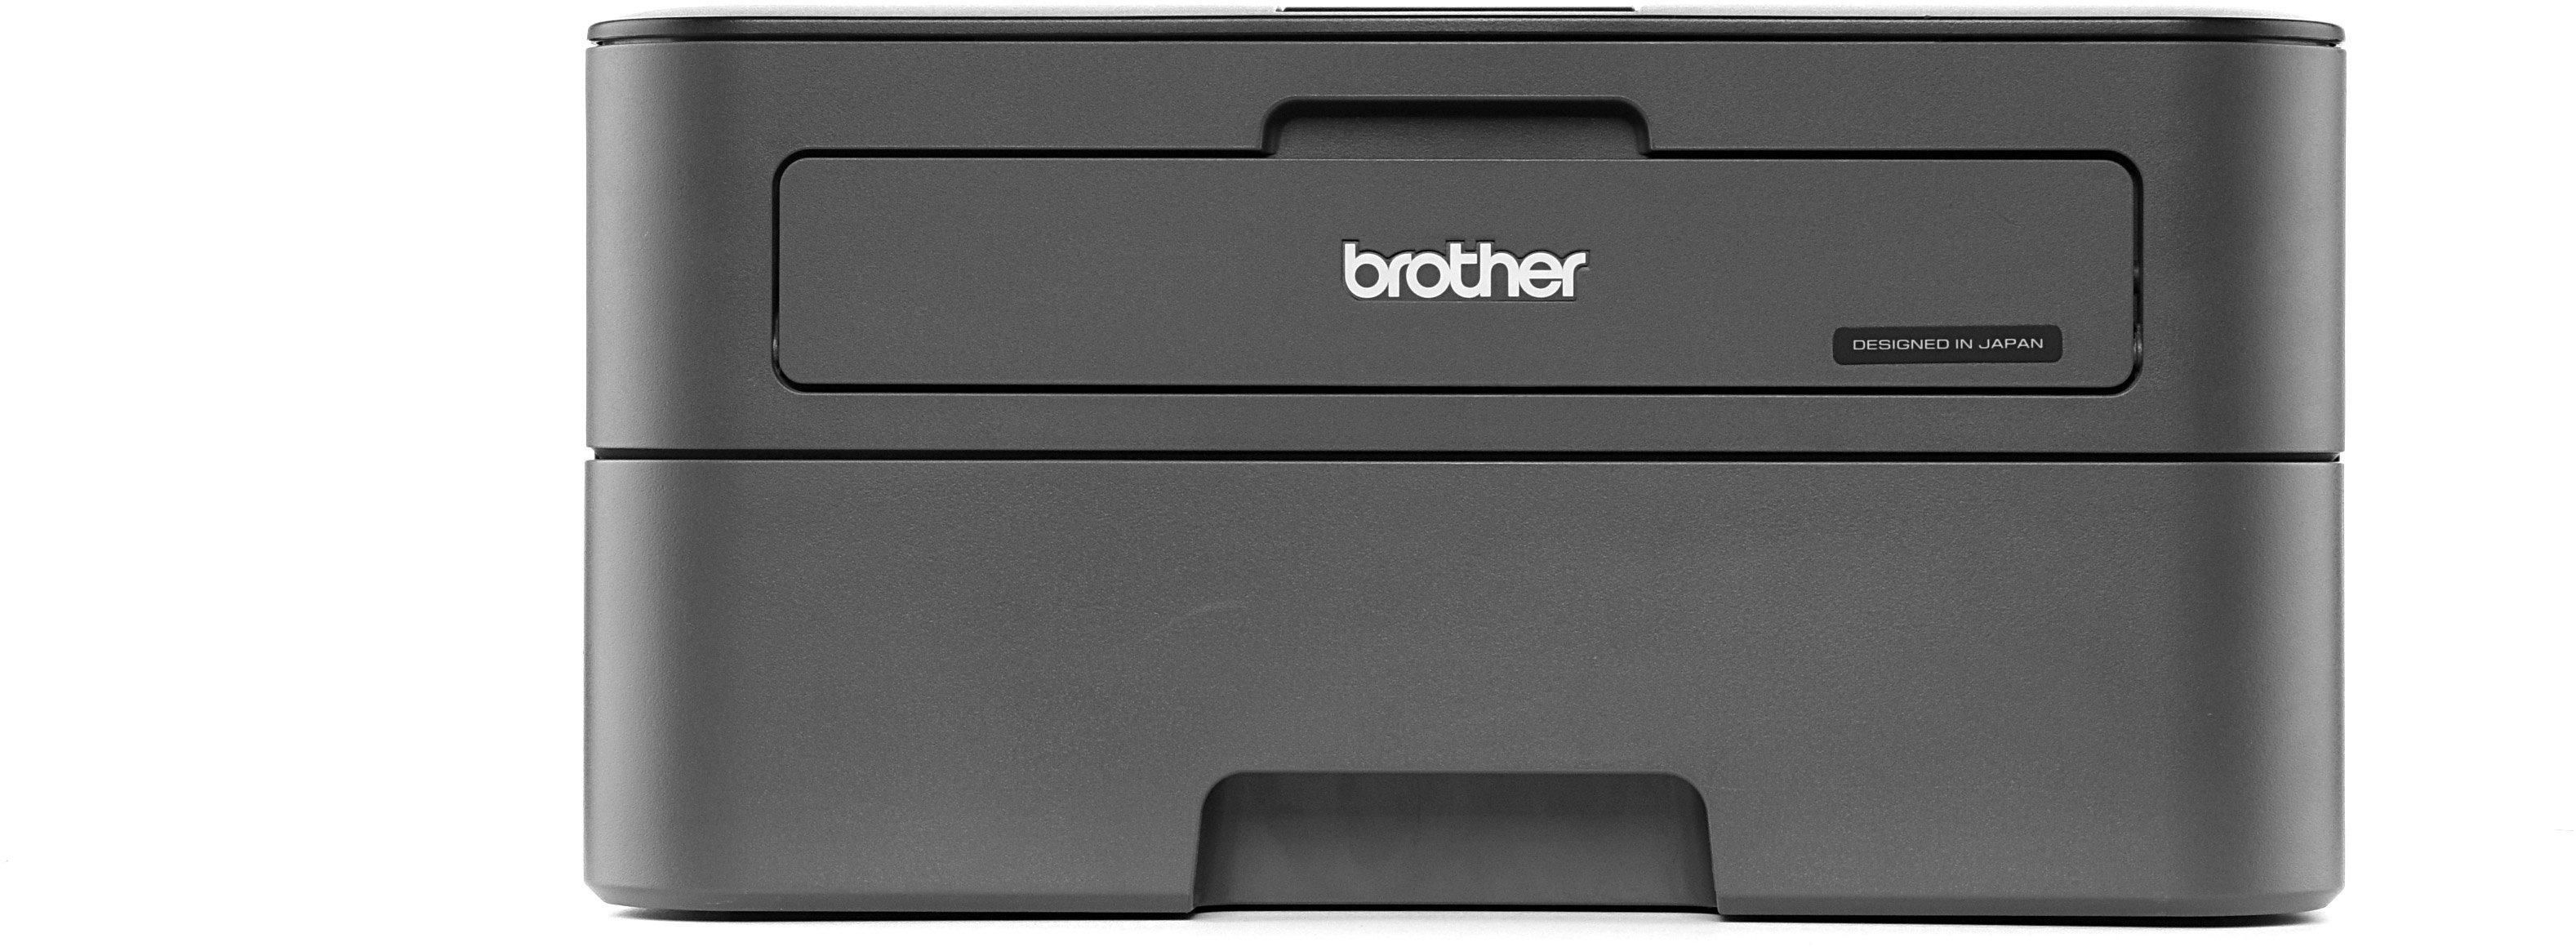 Brother HL-L2365DW Mono Laser Printer with 2-sided print and wireless connectivity